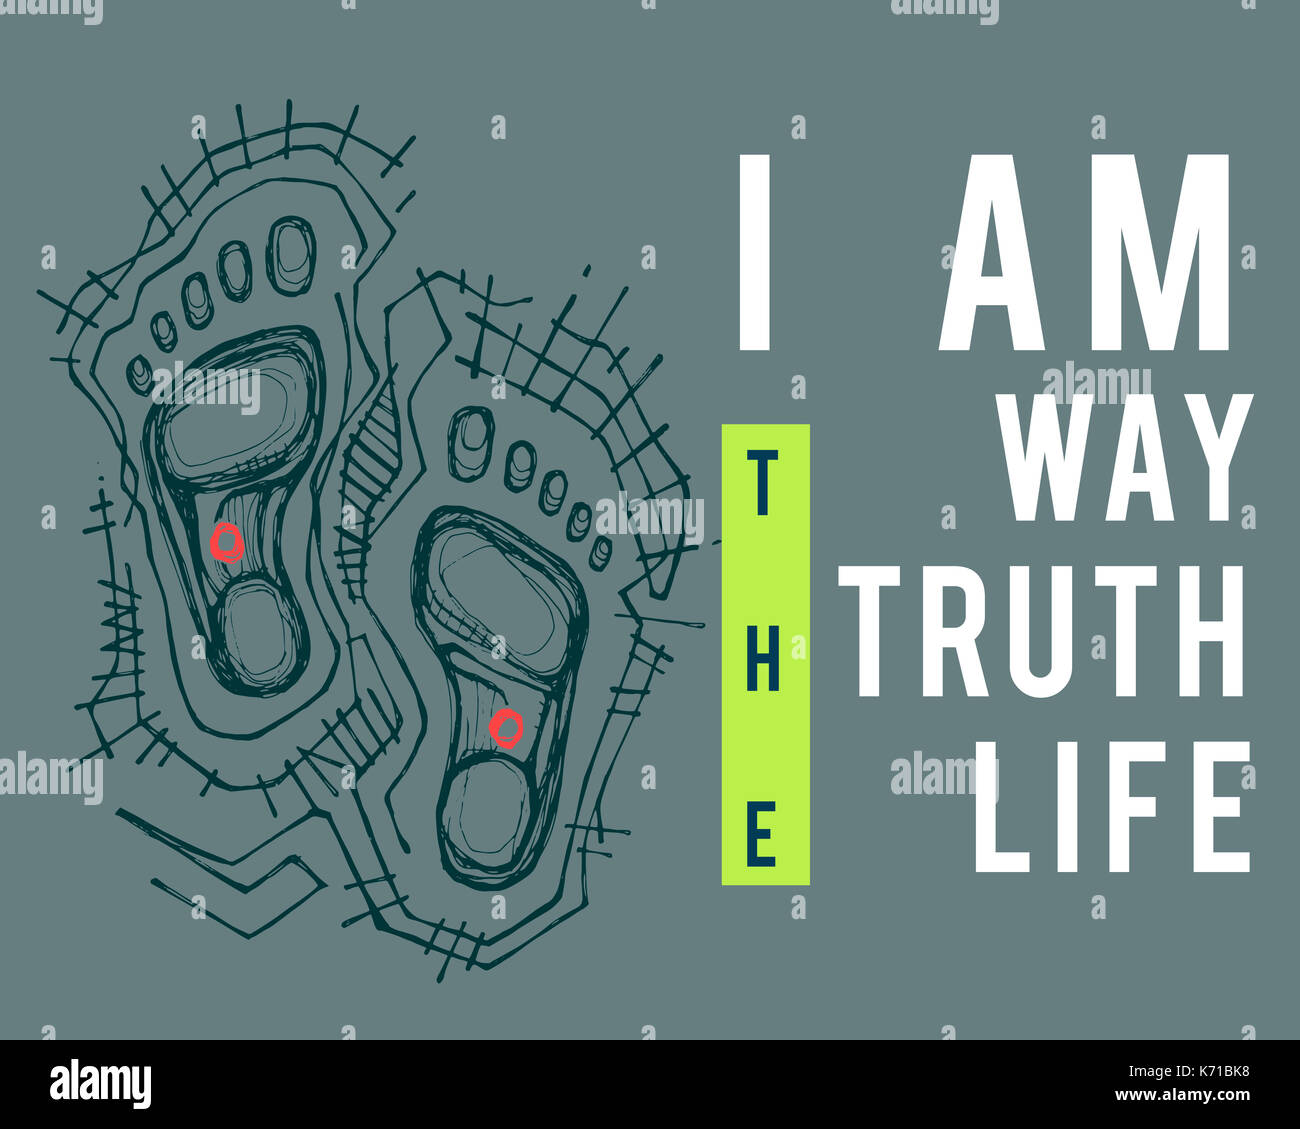 Illustration or drawing of the phrase: I am the way the truth the life, and the feet of Jesus Christ Stock Photo